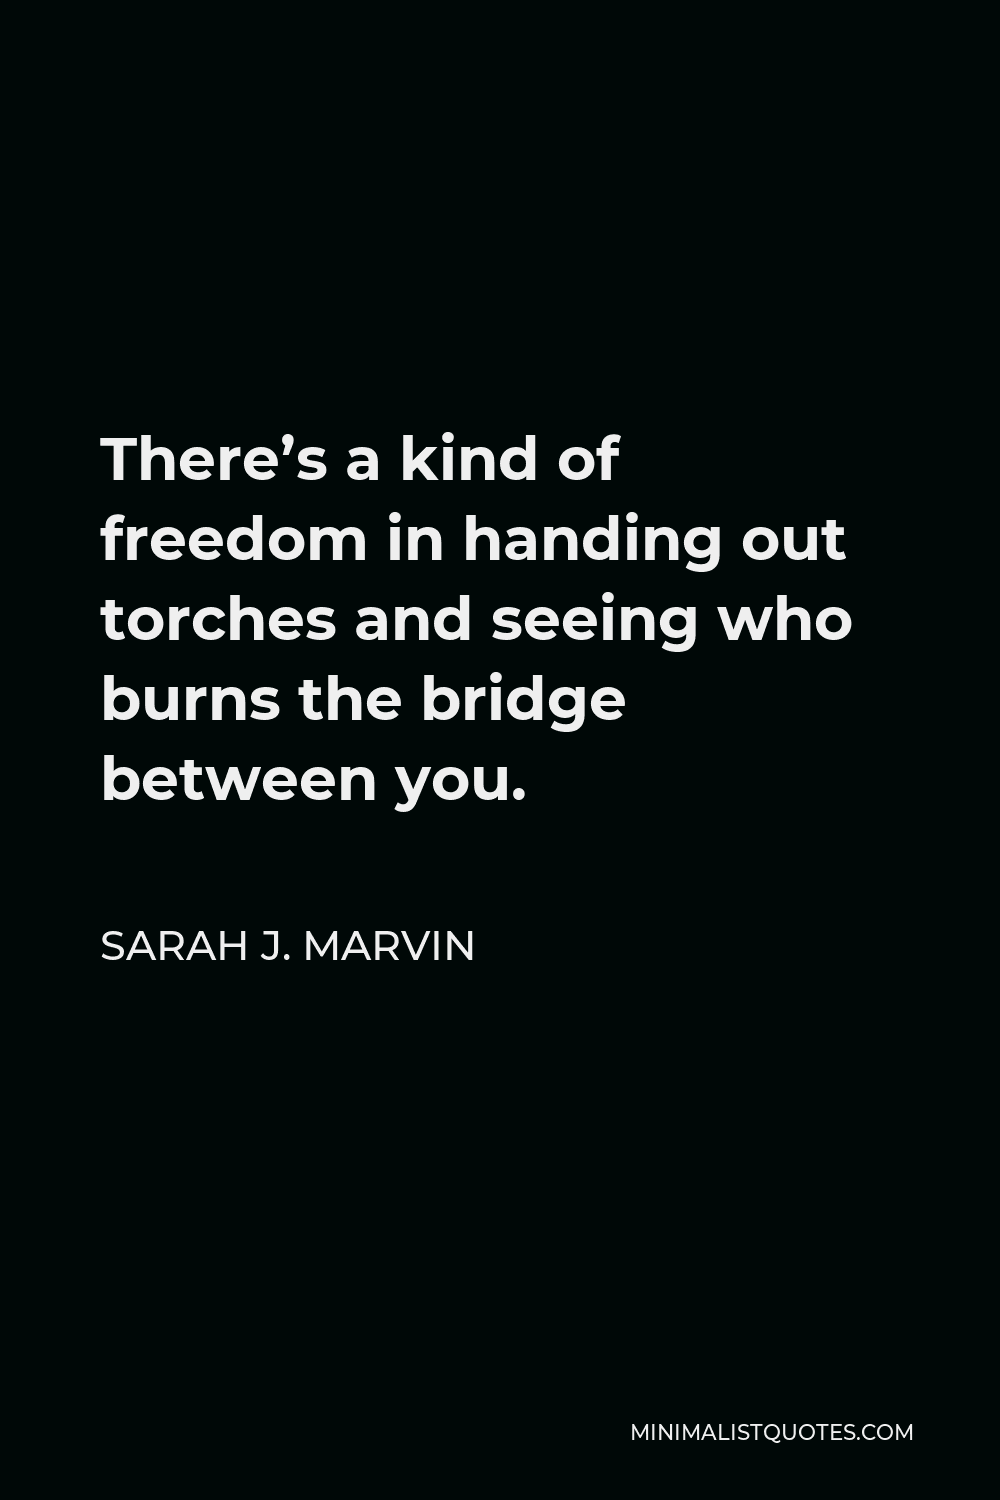 Sarah J. Marvin Quote - There’s a kind of freedom in handing out torches and seeing who burns the bridge between you.